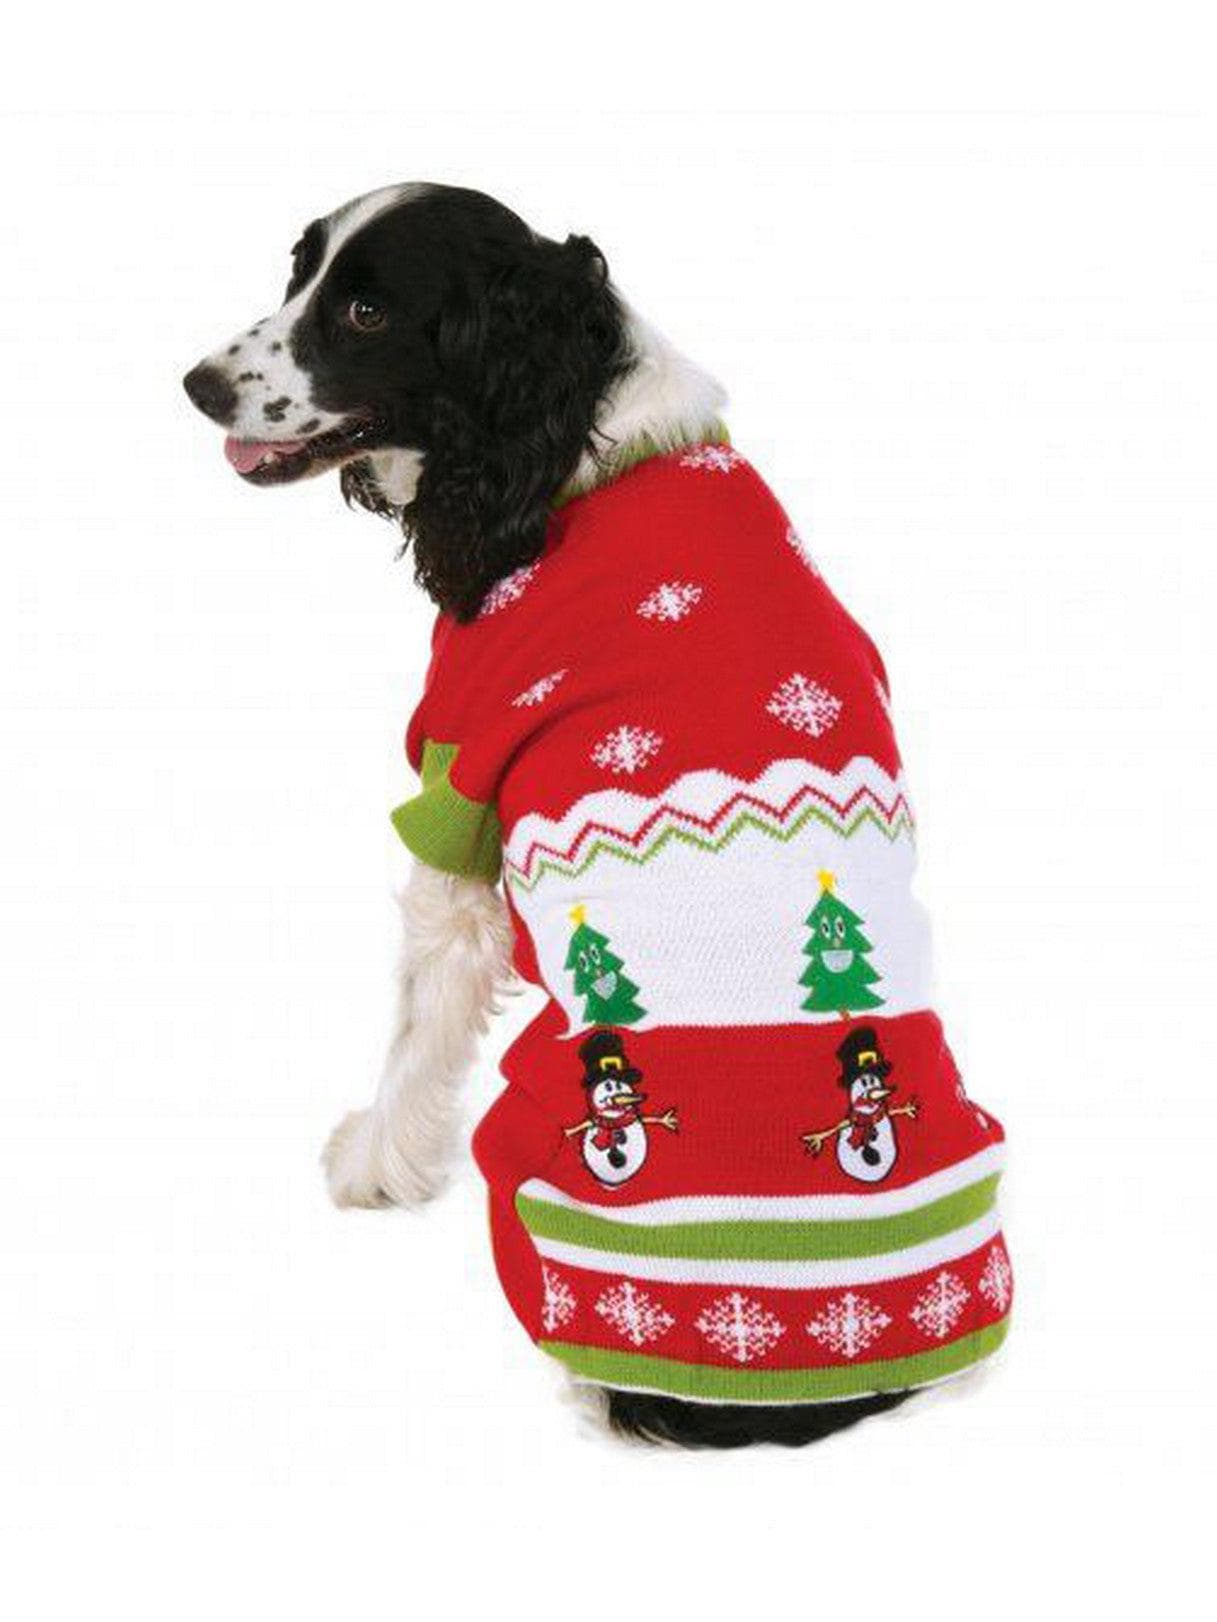 Ugly Christmas Pet Sweater - costumes.com